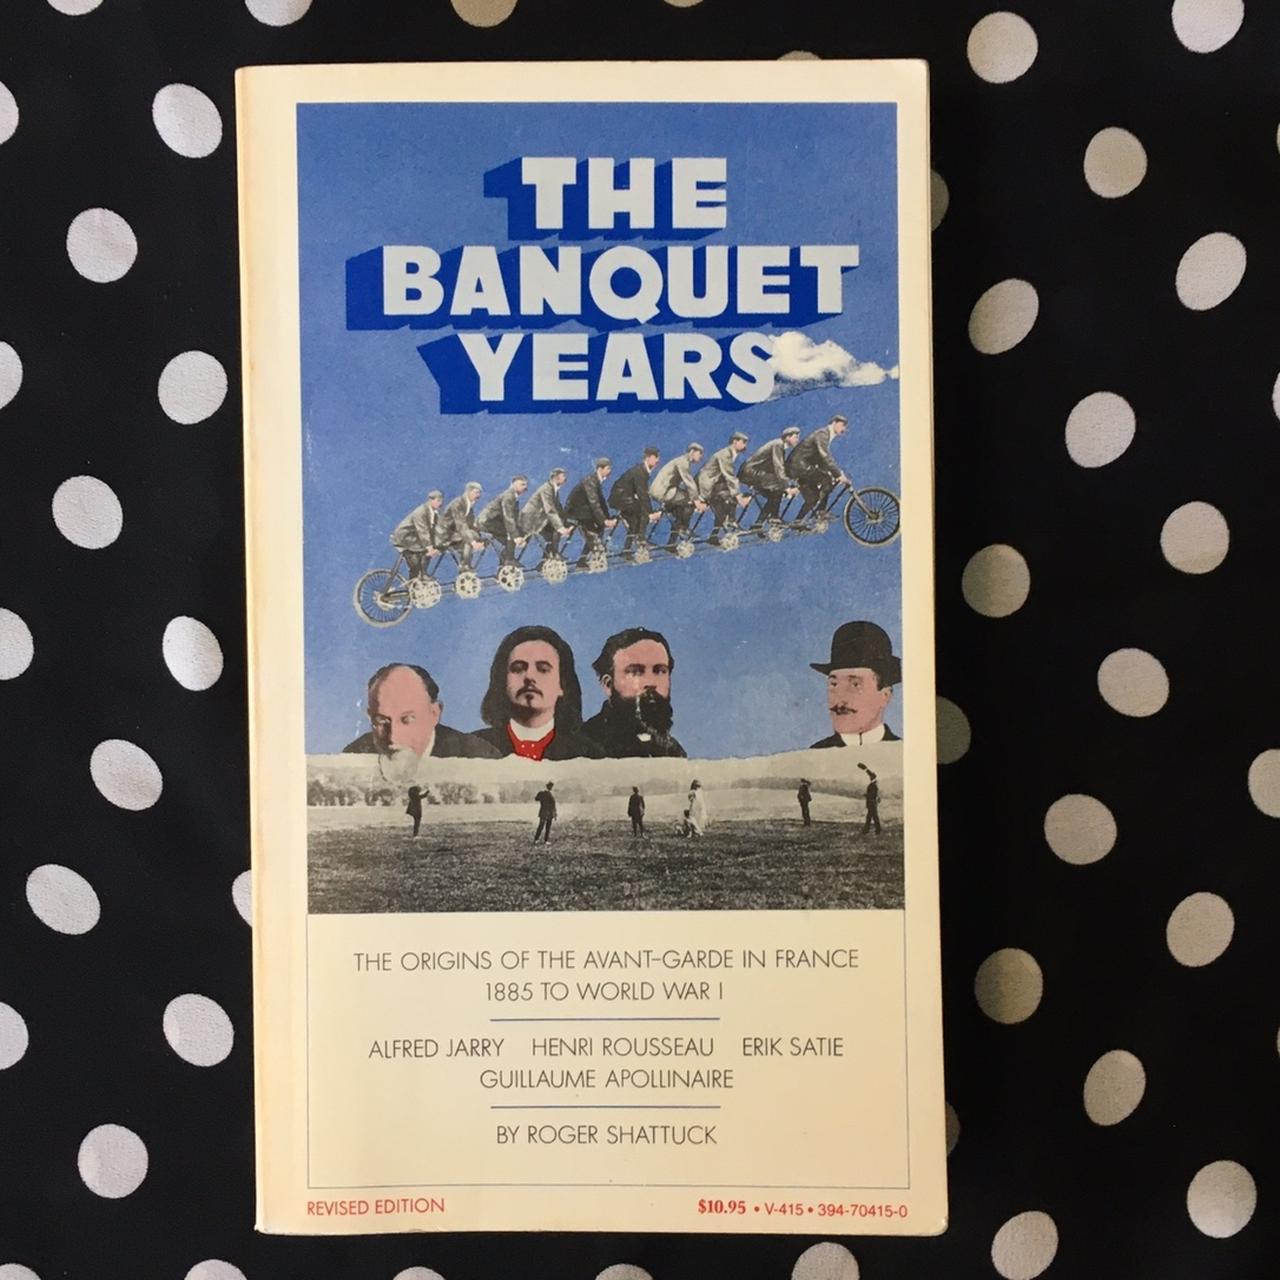 the banquet years by roger shattuck